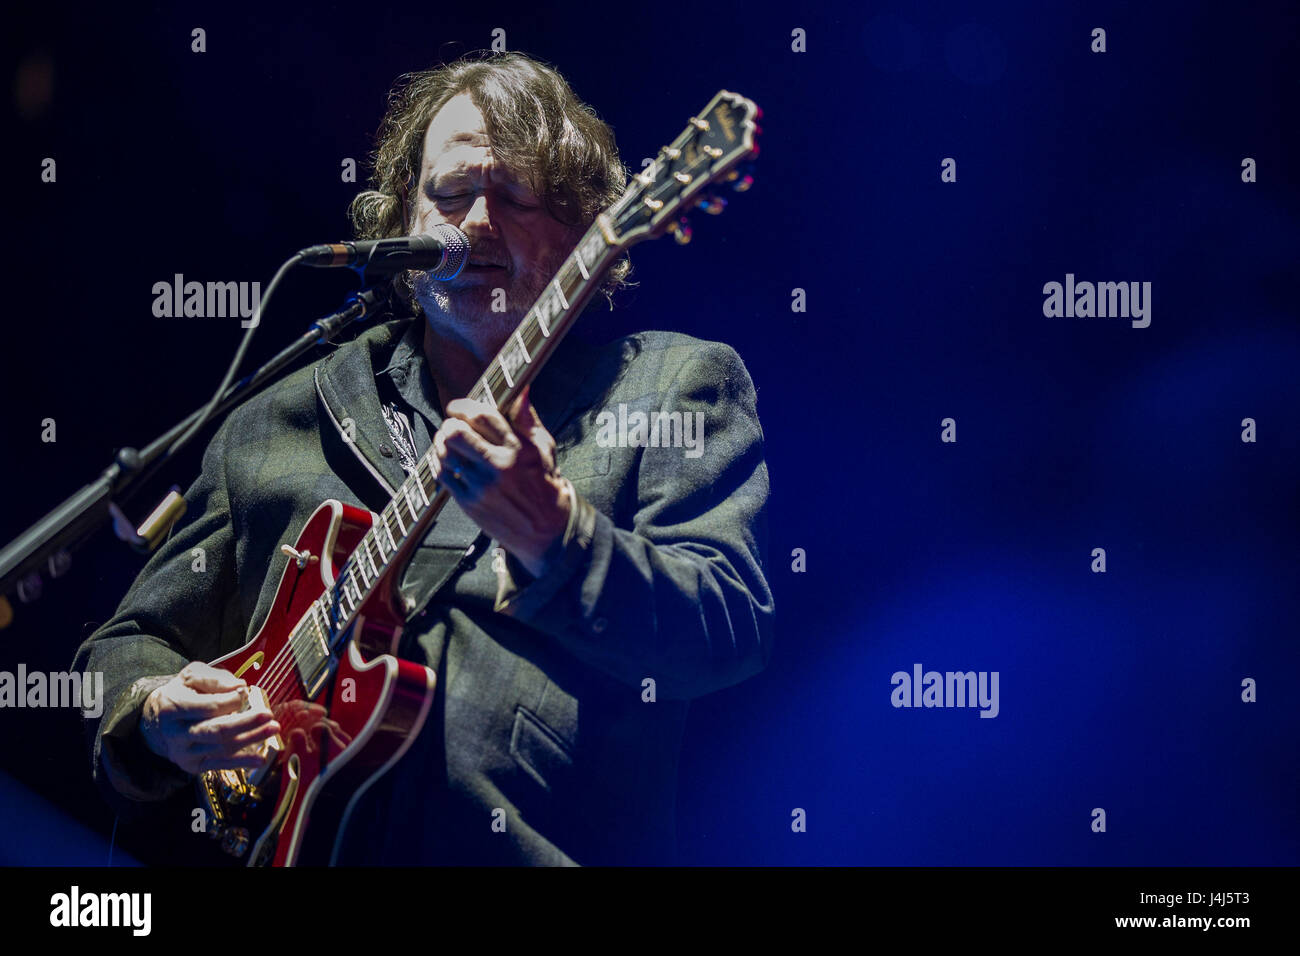 John Bell, vocalist of Widespread Panic performs at the 2017 Beale Street Music Festival at Tom Lee Park in Memphis, Tenn. on May 5, 2017. Stock Photo